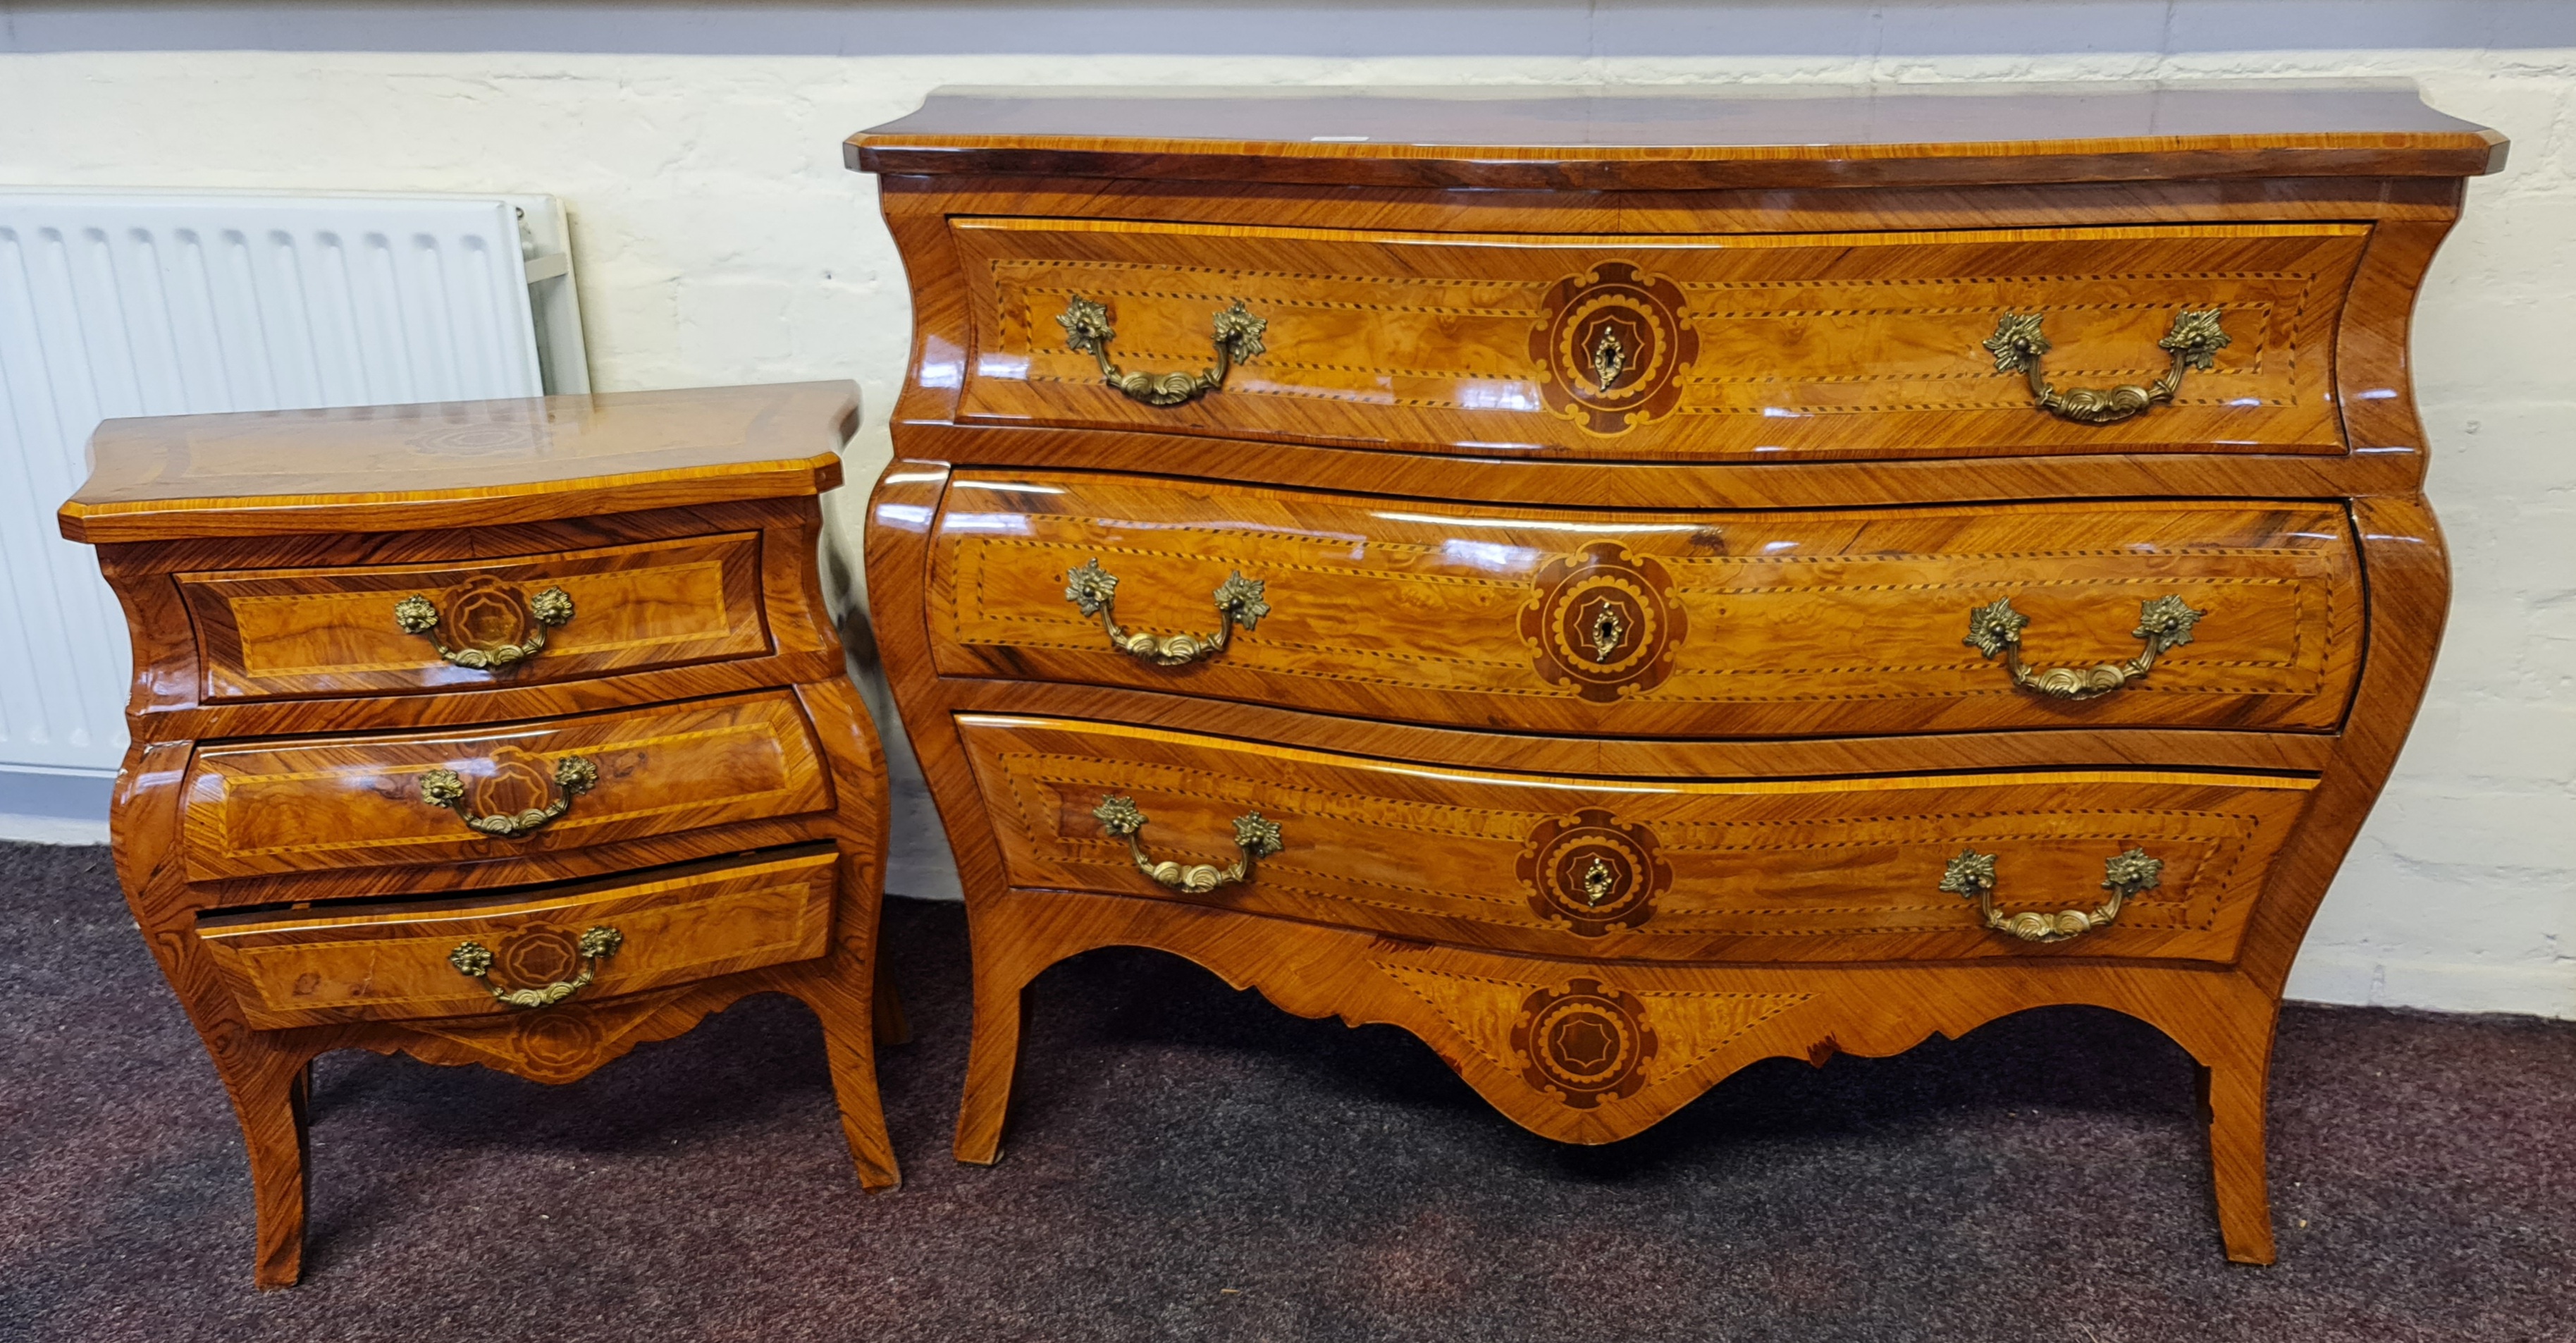 A reproduction king wood and walnut style French three drawer chest with two matching bedside